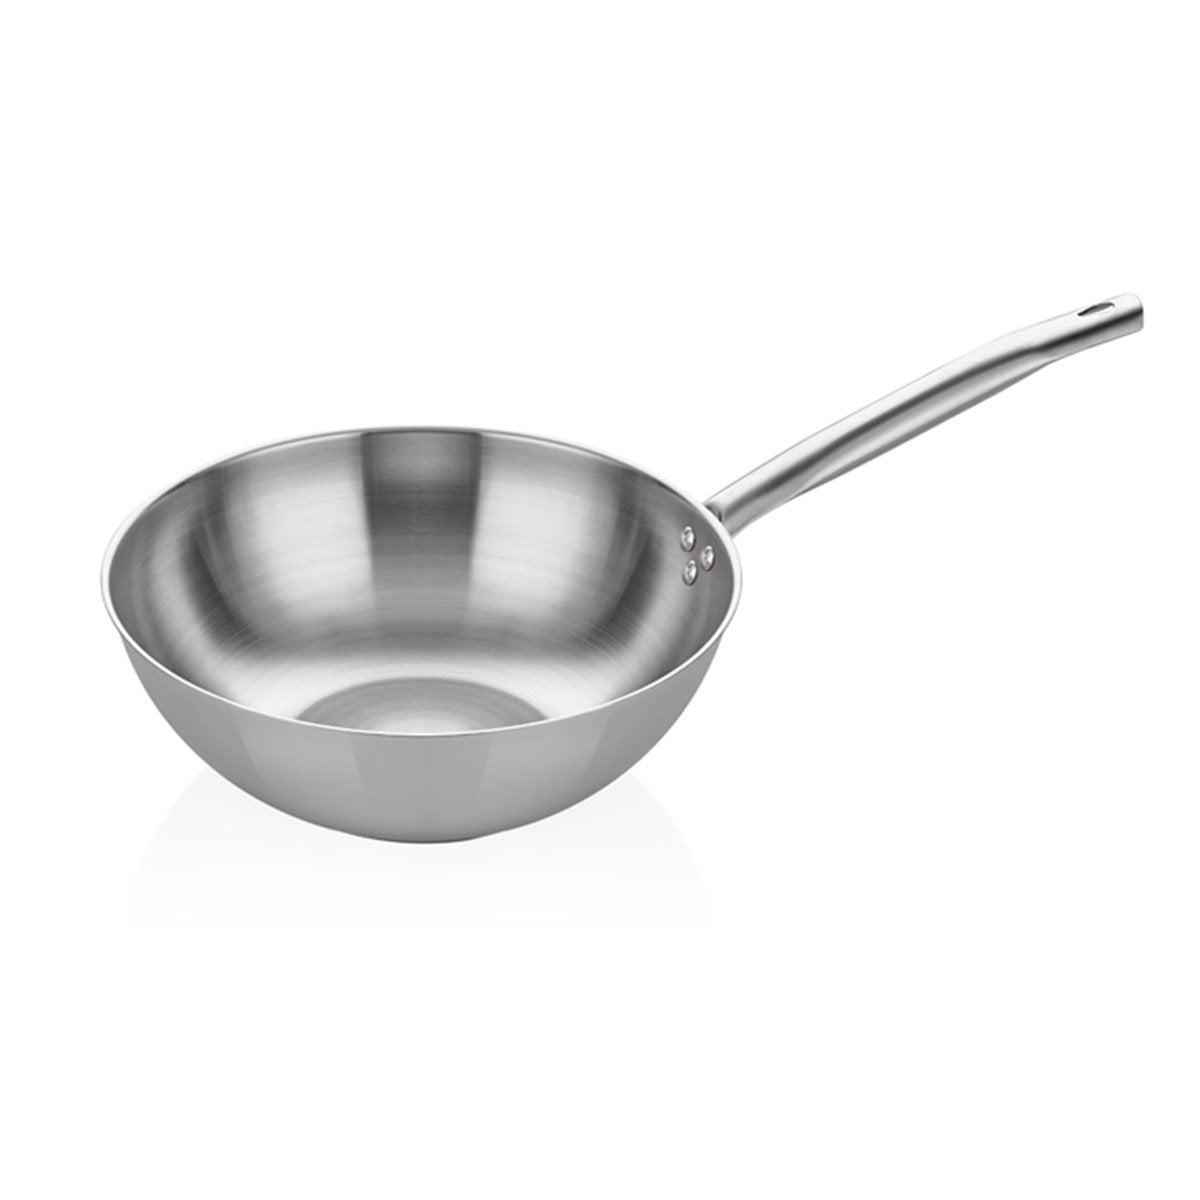 ABM Steel Round Wok Pan With Stainless Steel Handle 28cm (A 107WK 28)